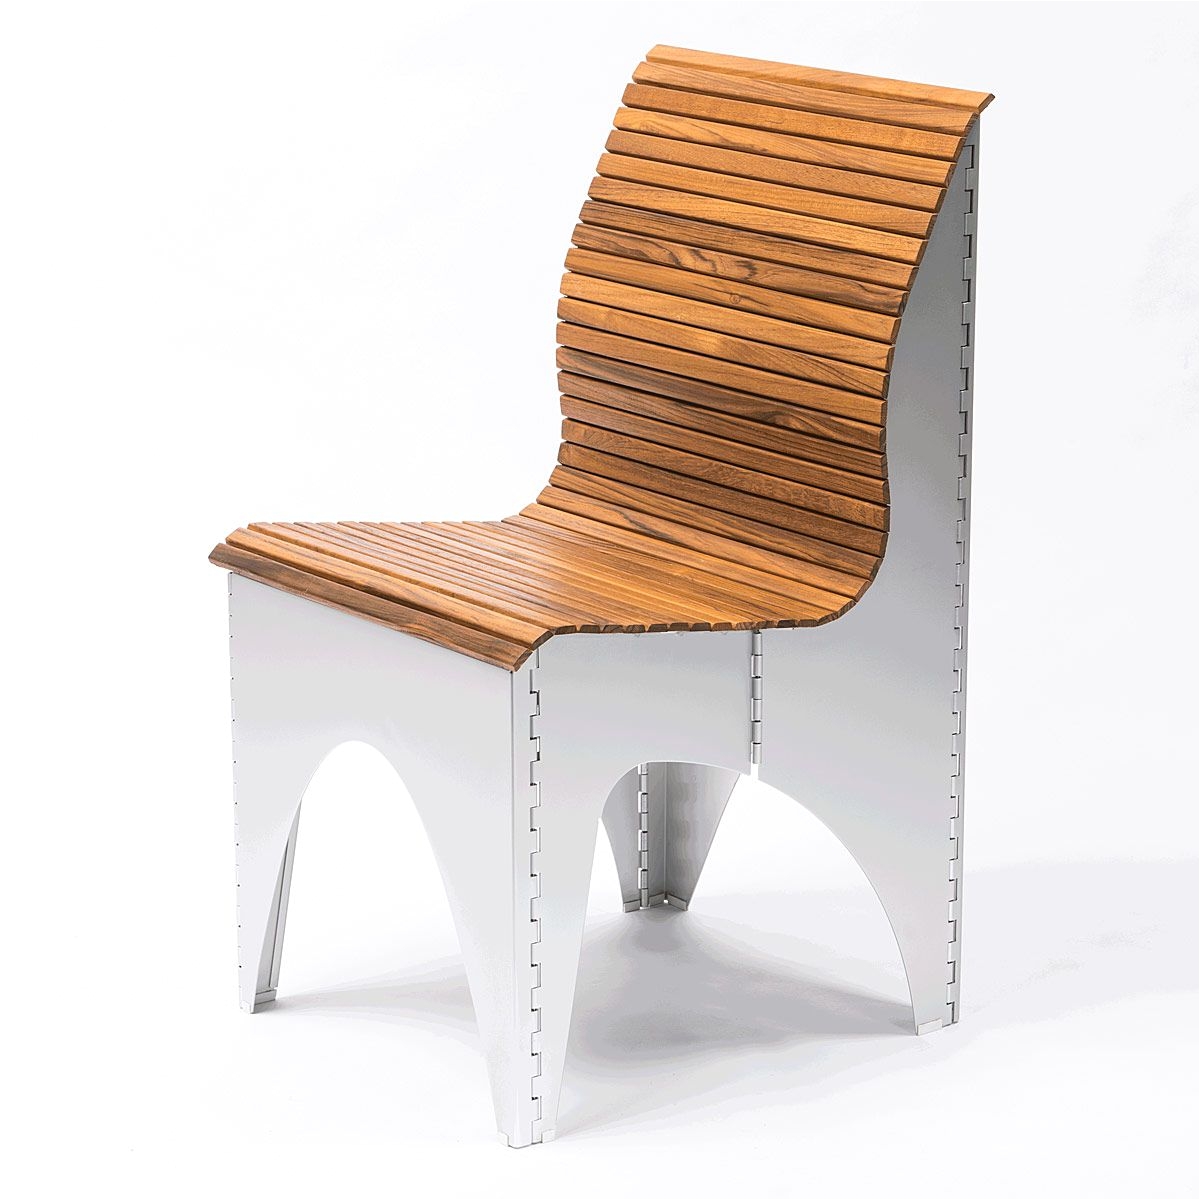 this folding chair is thoughtfully designed using tambour a flexible slatted surface fixed to canvas